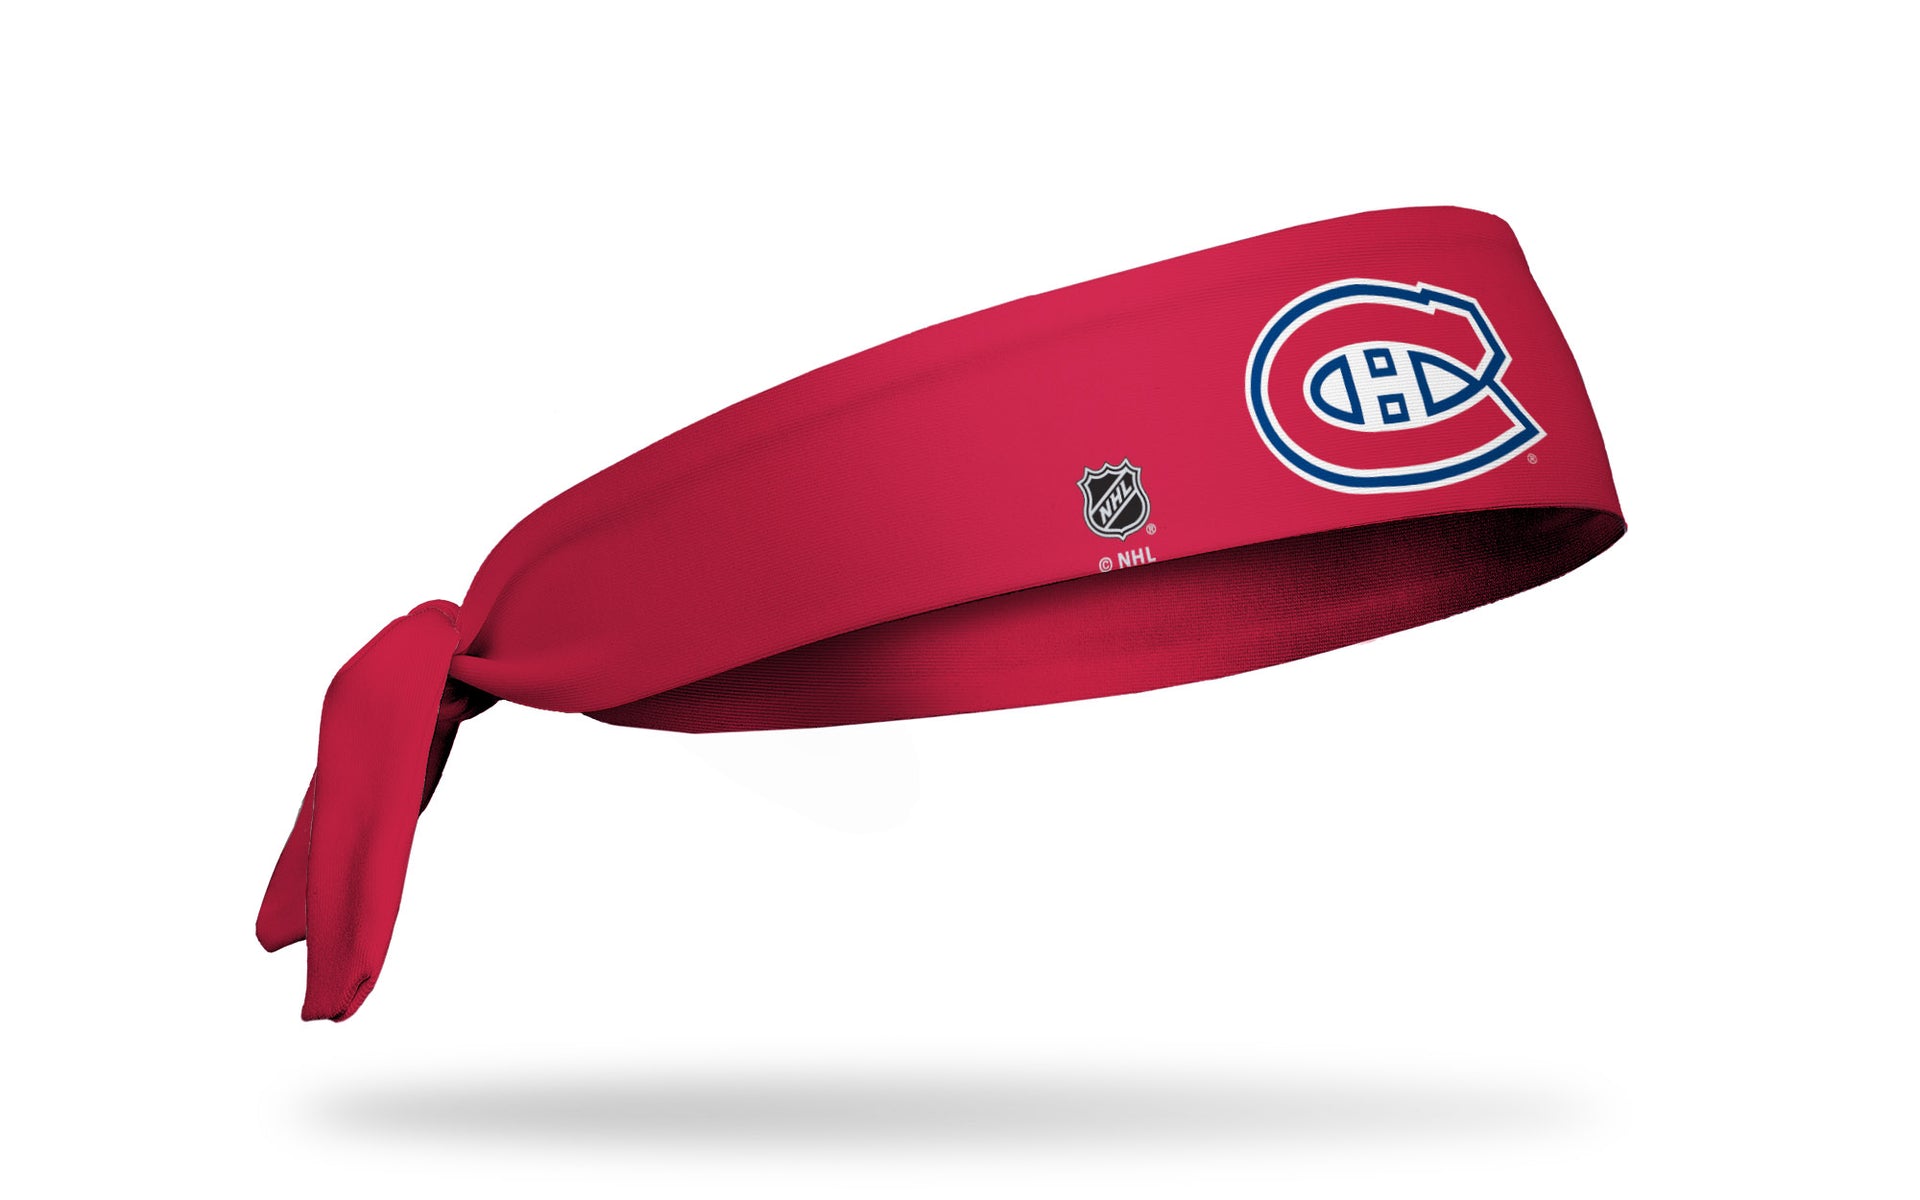 Montreal Canadiens: Logo Red Tie Headband - View 2